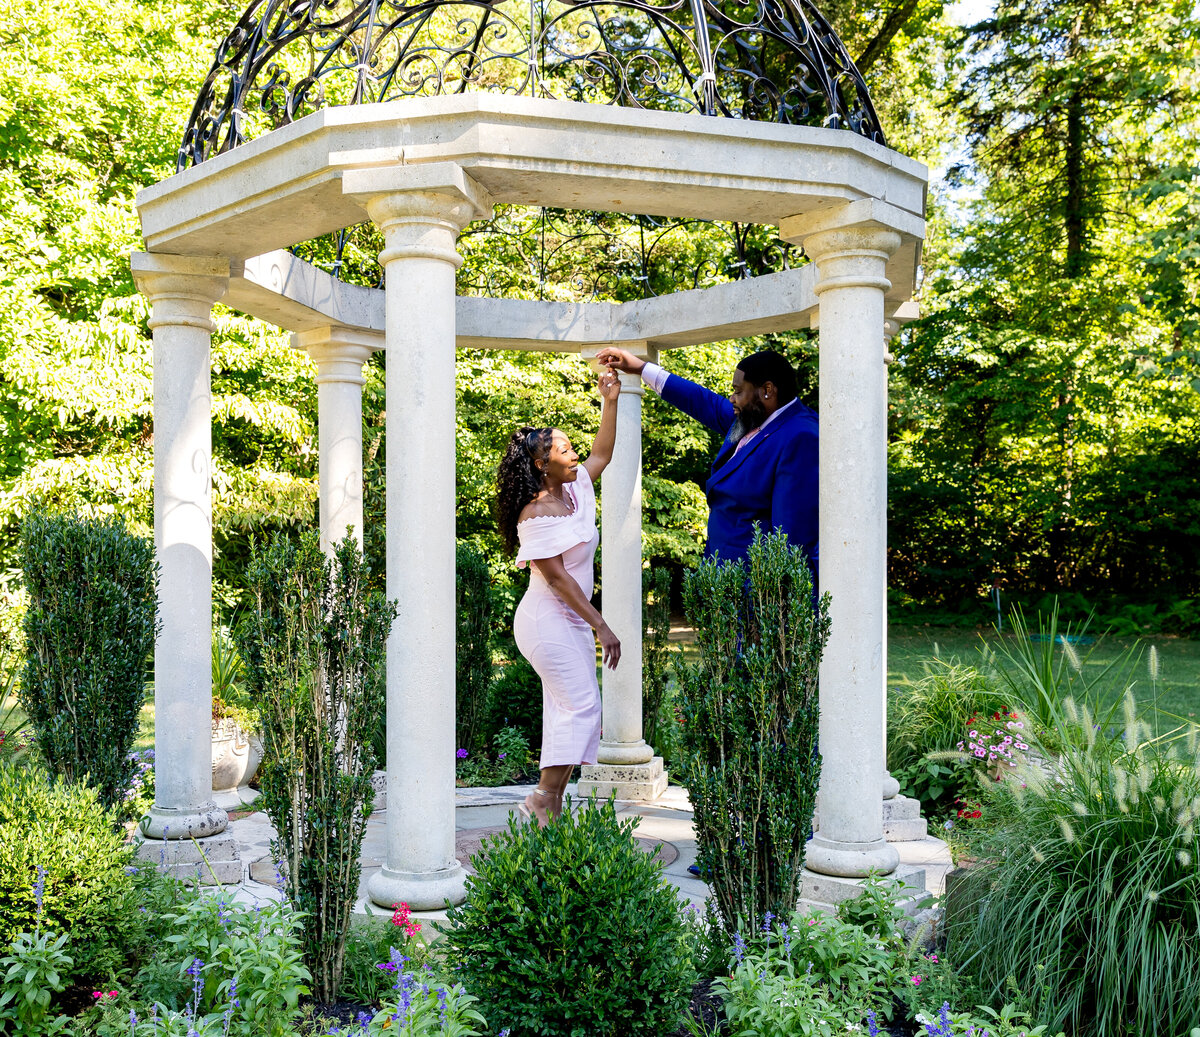 The young black couple is dancing in a garden for their engagements pictures. The day is sunny and clear skies.